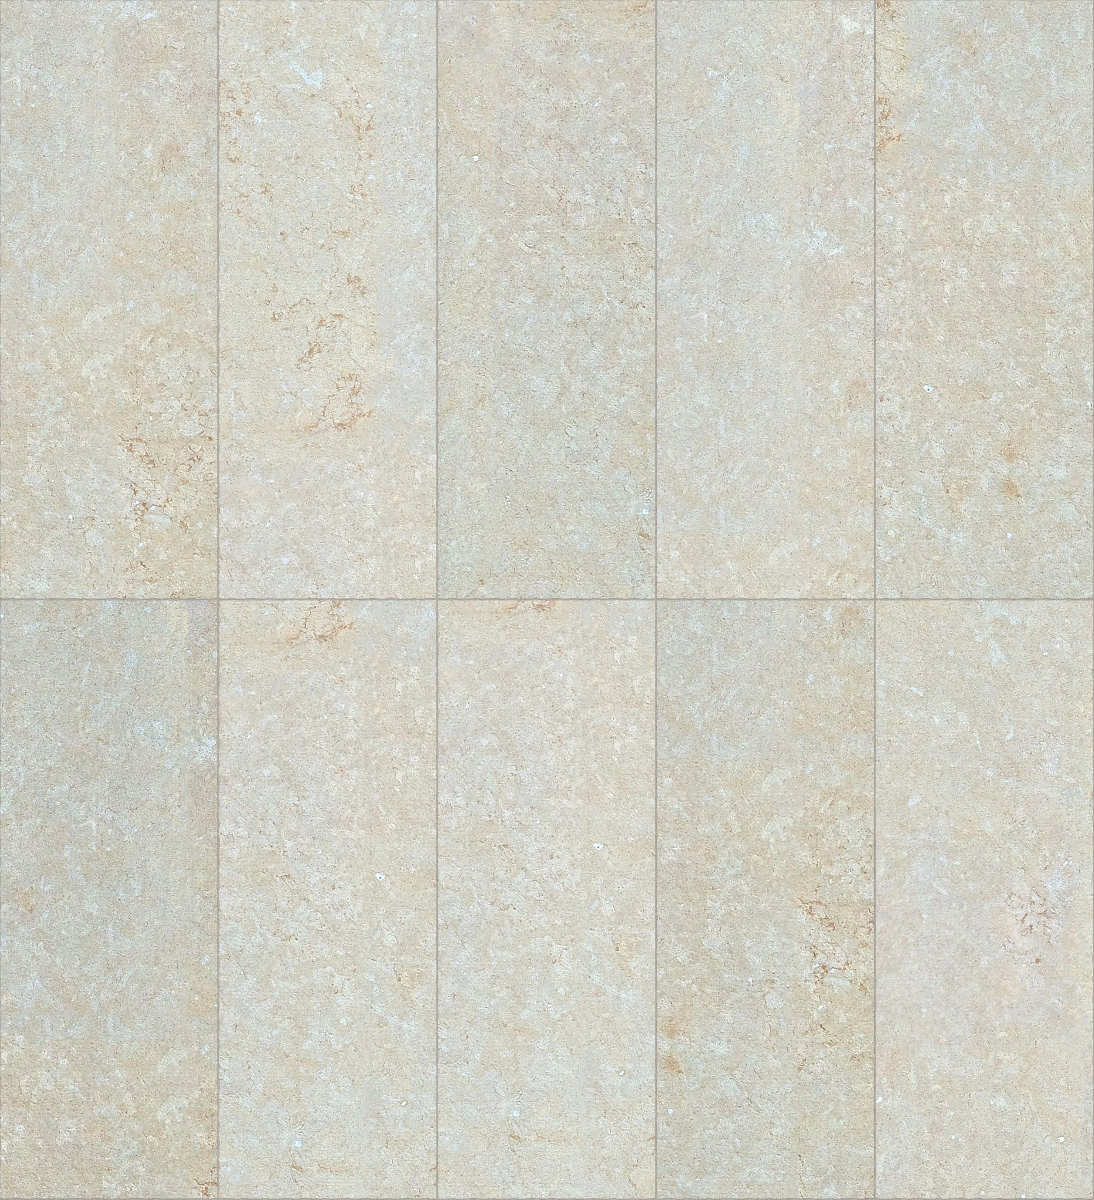 A seamless stone texture with reconstituted stone blocks arranged in a Stack pattern